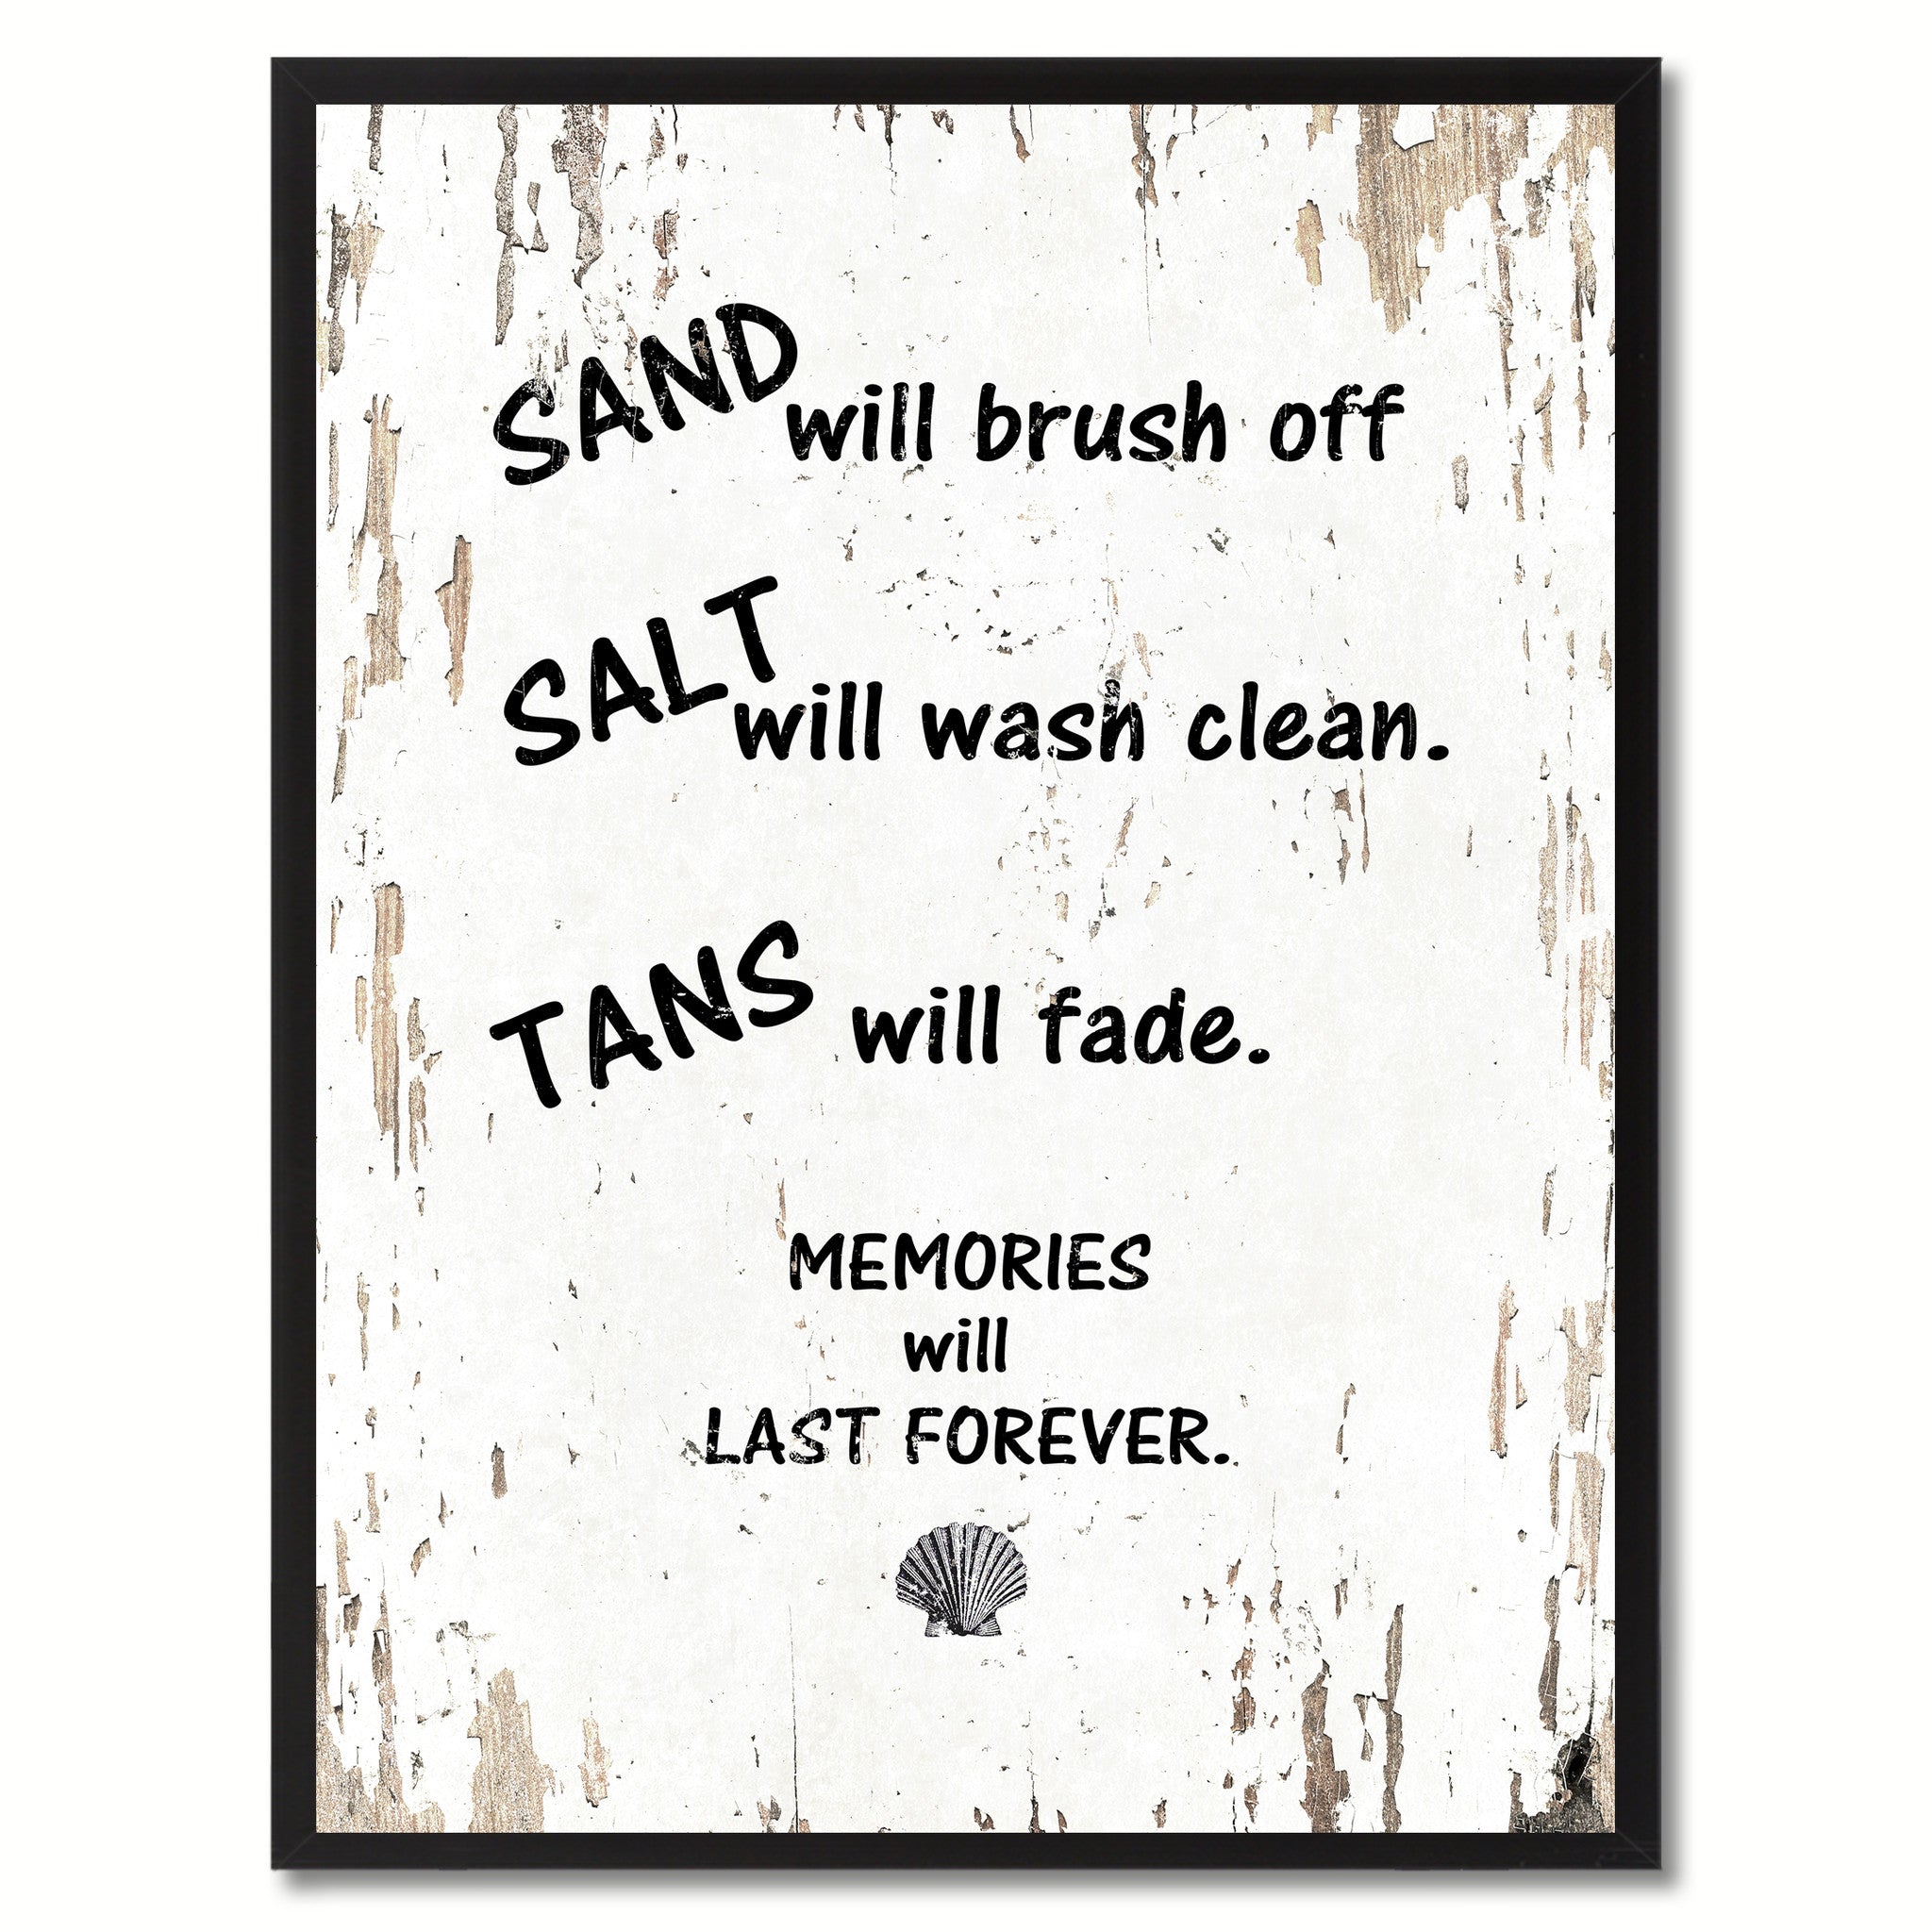 Sand Salt Tans Memories Will Last Forever Saying Canvas Print, Black Picture Frame Home Decor Wall Art Gifts